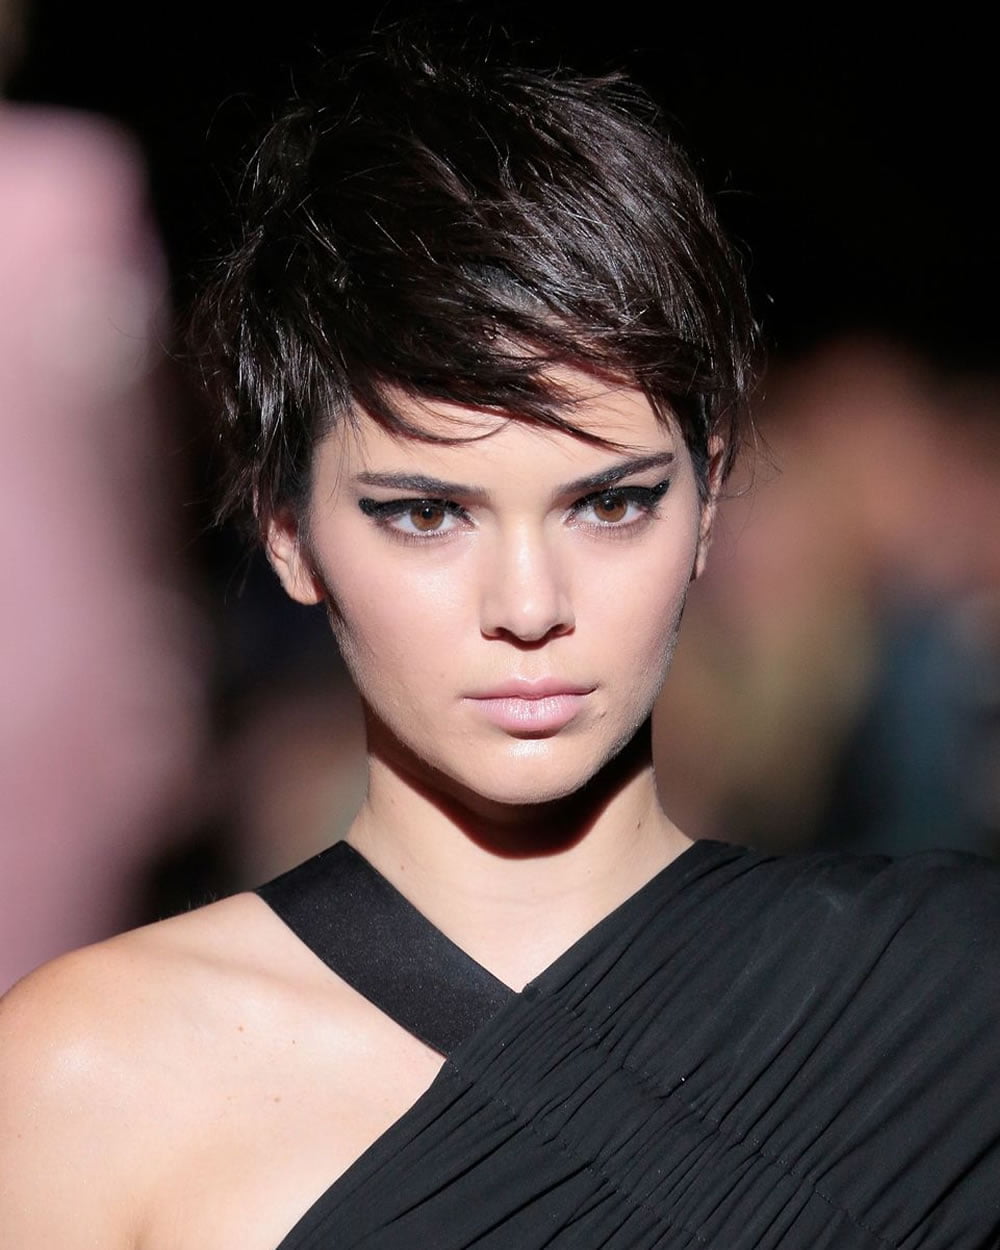 21 Trendy Short Haircut Images and Pixie Hairstyles You’ll Really Love ...